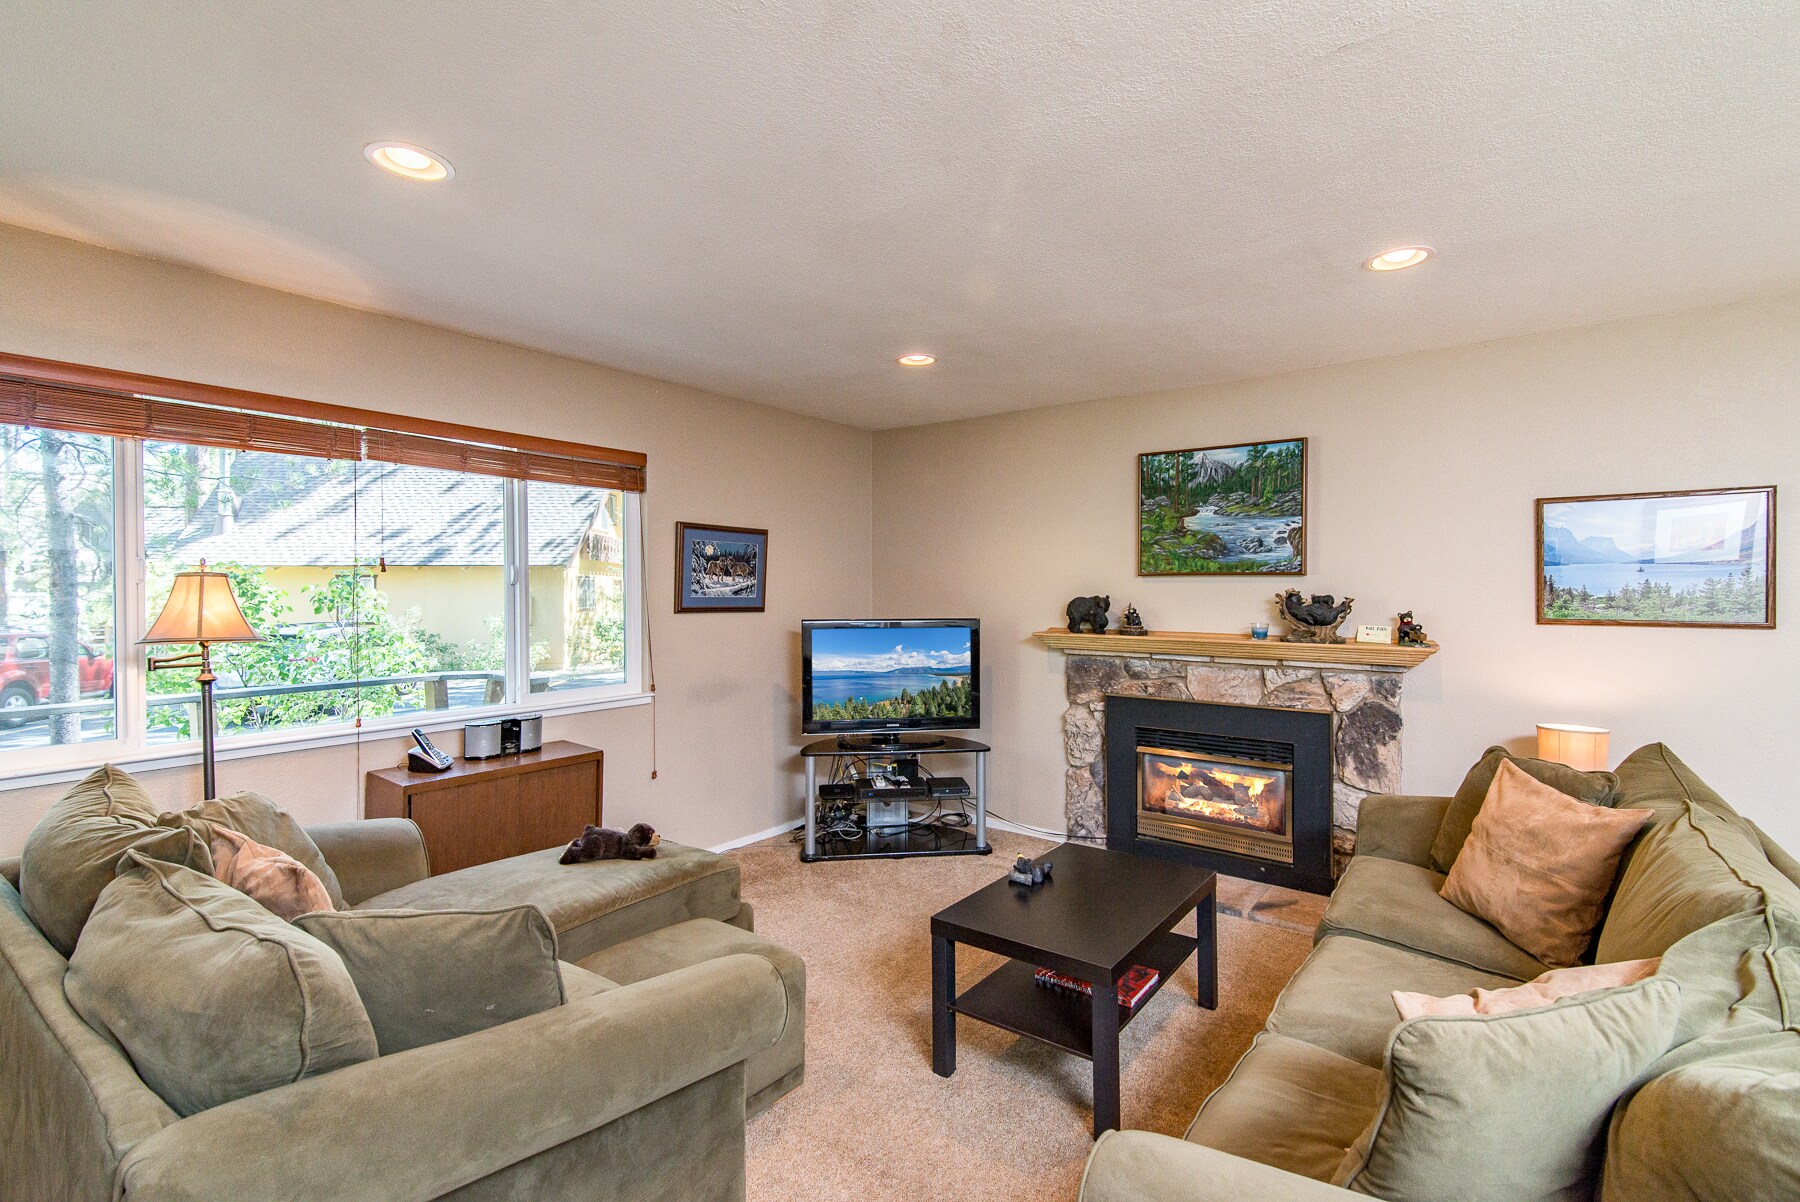 Welcome to Lake Tahoe! Get a fire going in the ultra-comfy and open living area.